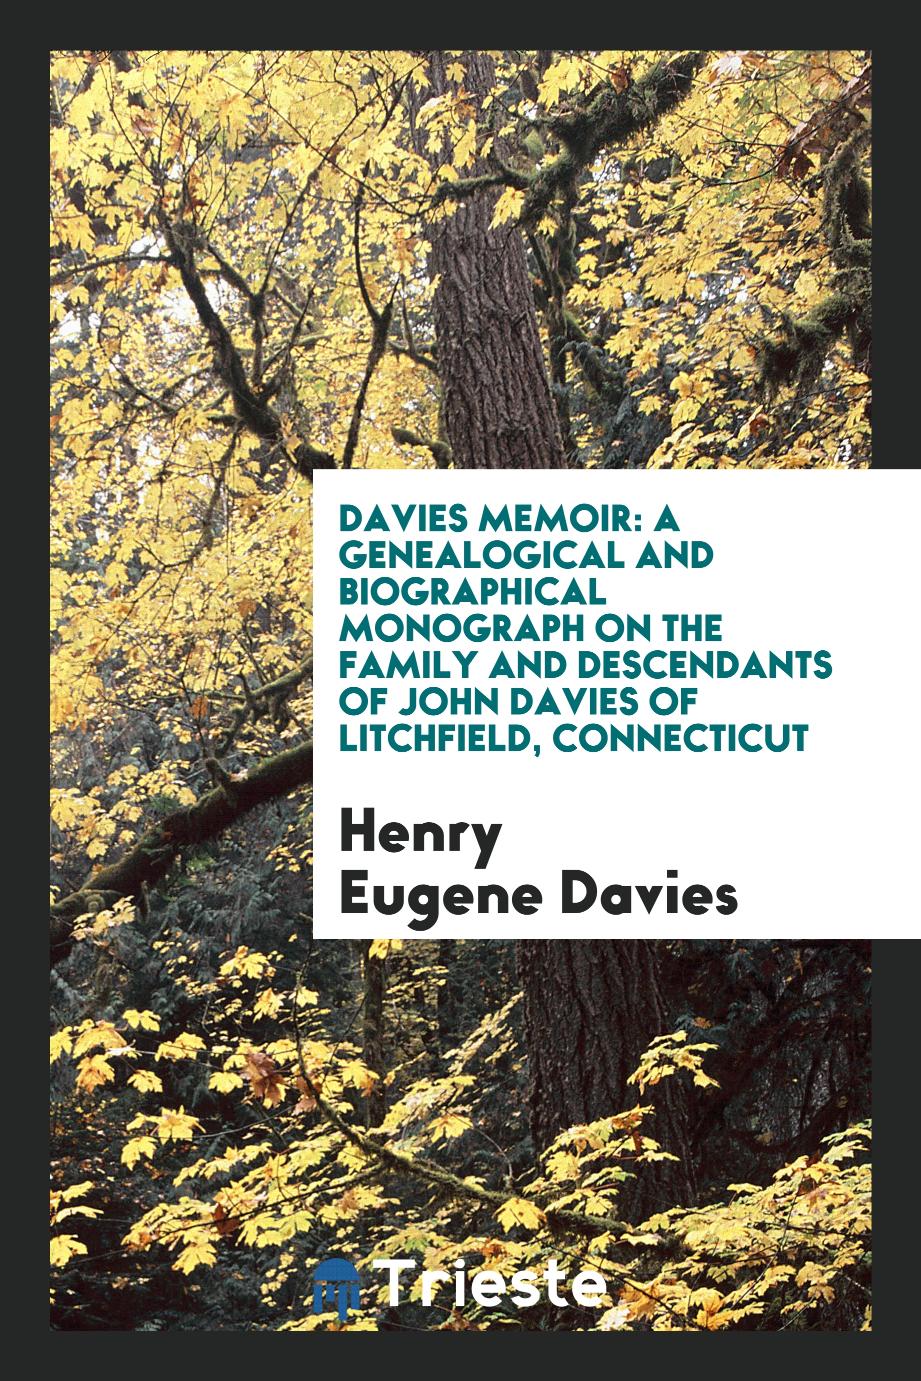 Davies Memoir: A Genealogical and Biographical Monograph on the Family and Descendants of John Davies of Litchfield, Connecticut